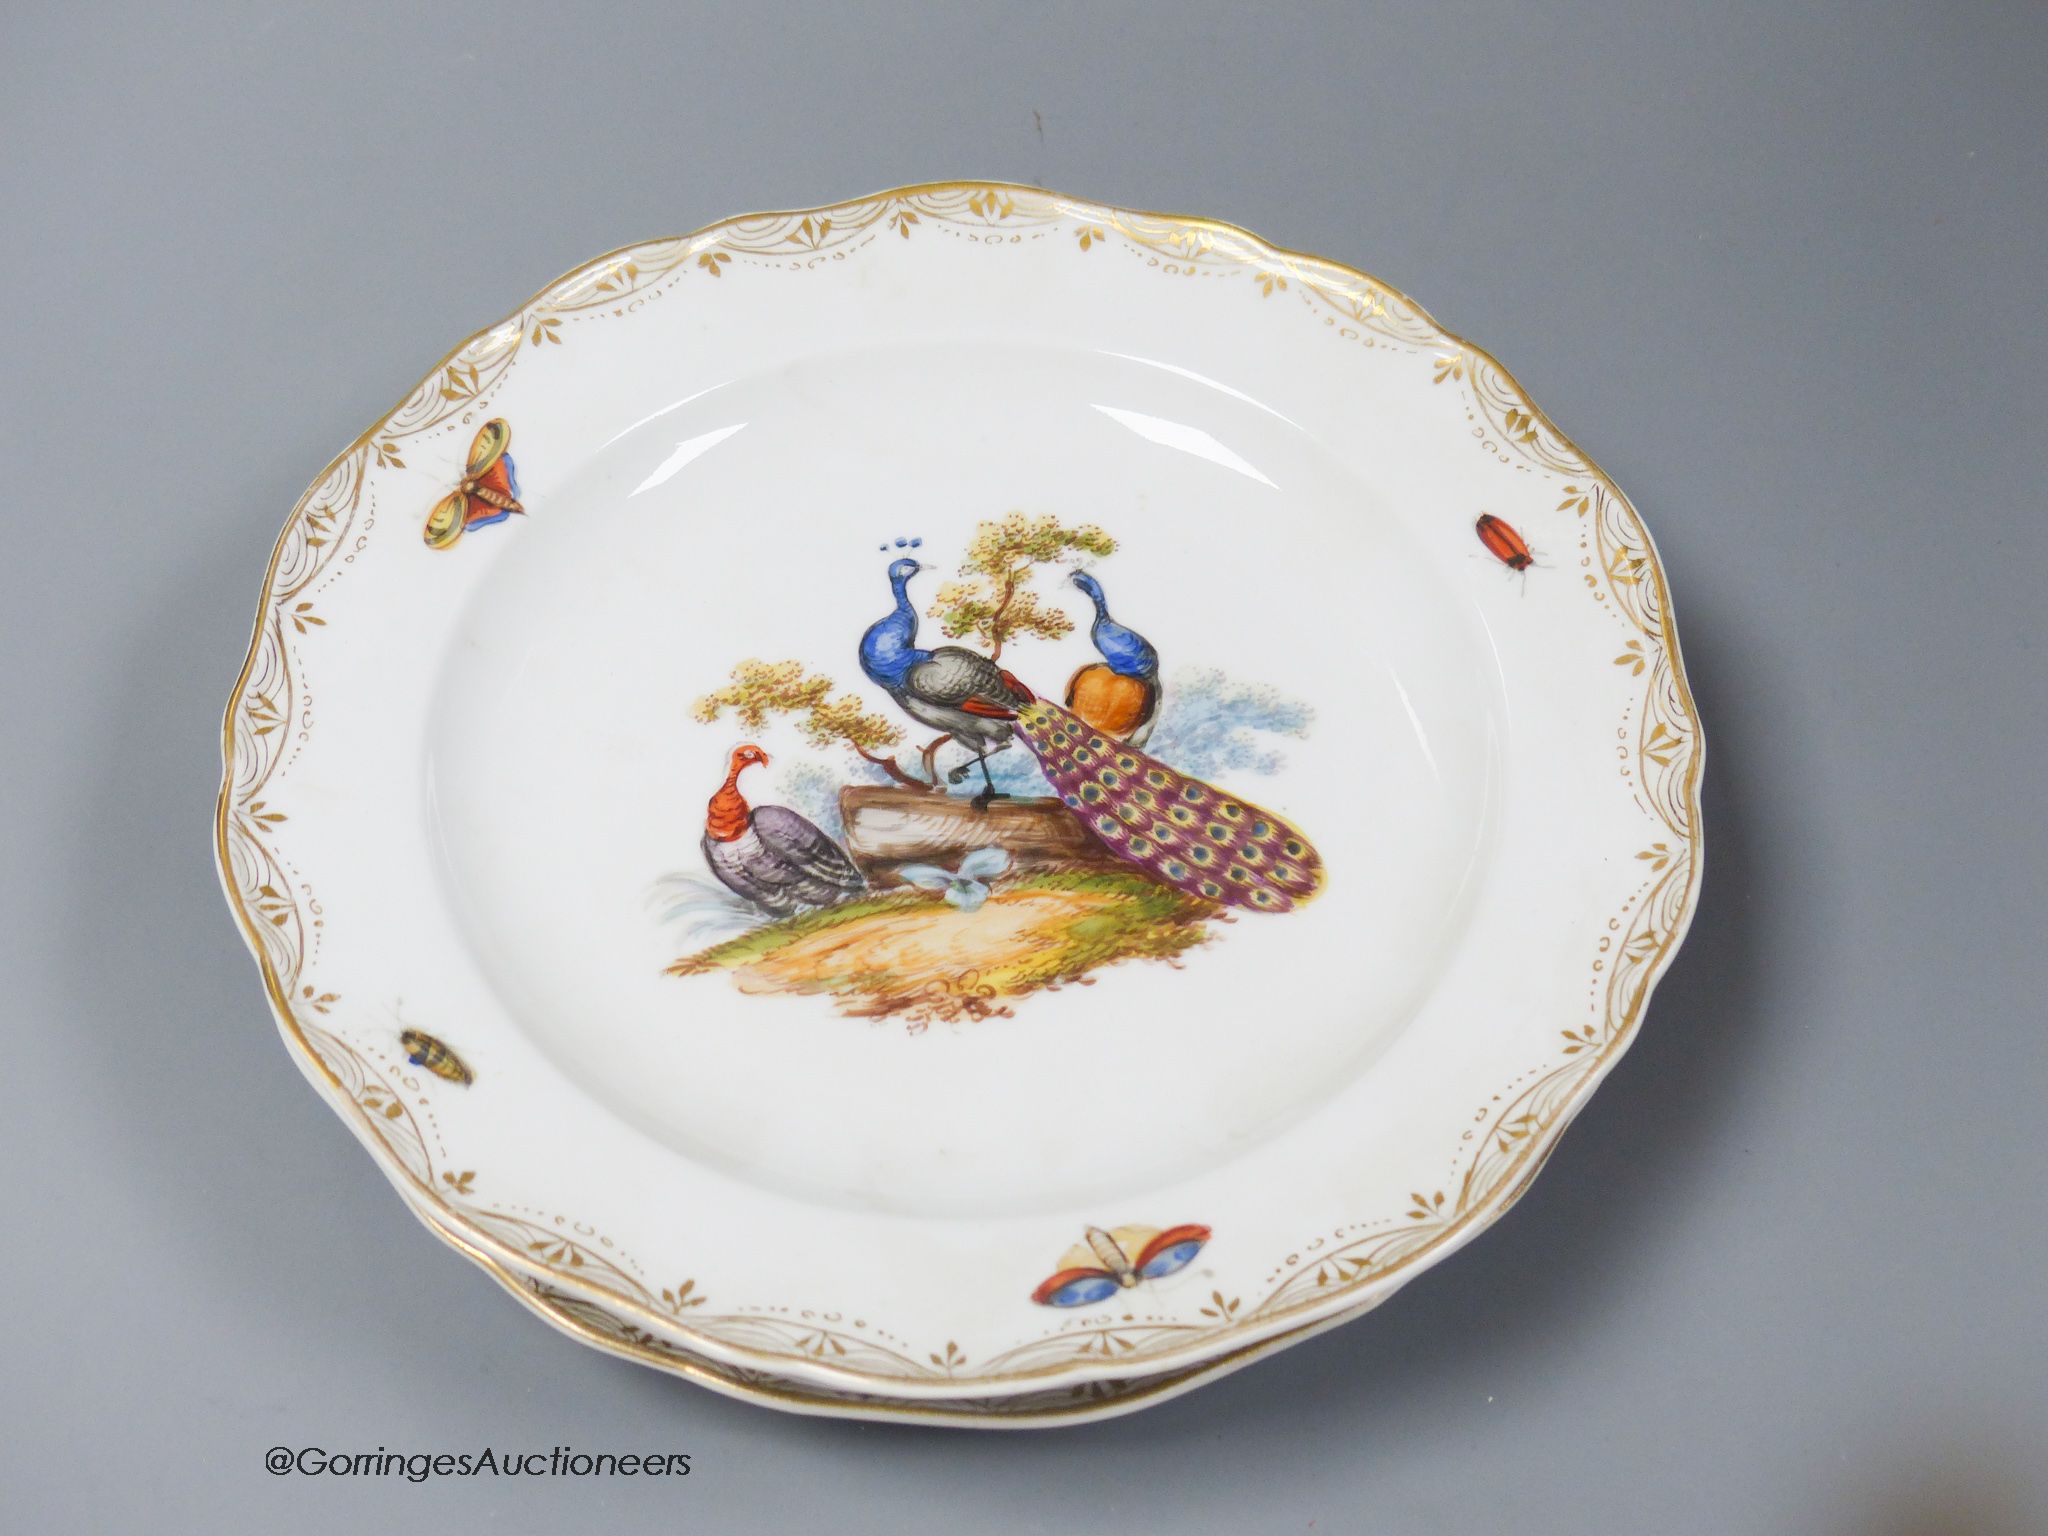 A set of six Meissen dessert dishes, painted with birds,factory seconds, 25.5cm diameter - Image 4 of 8